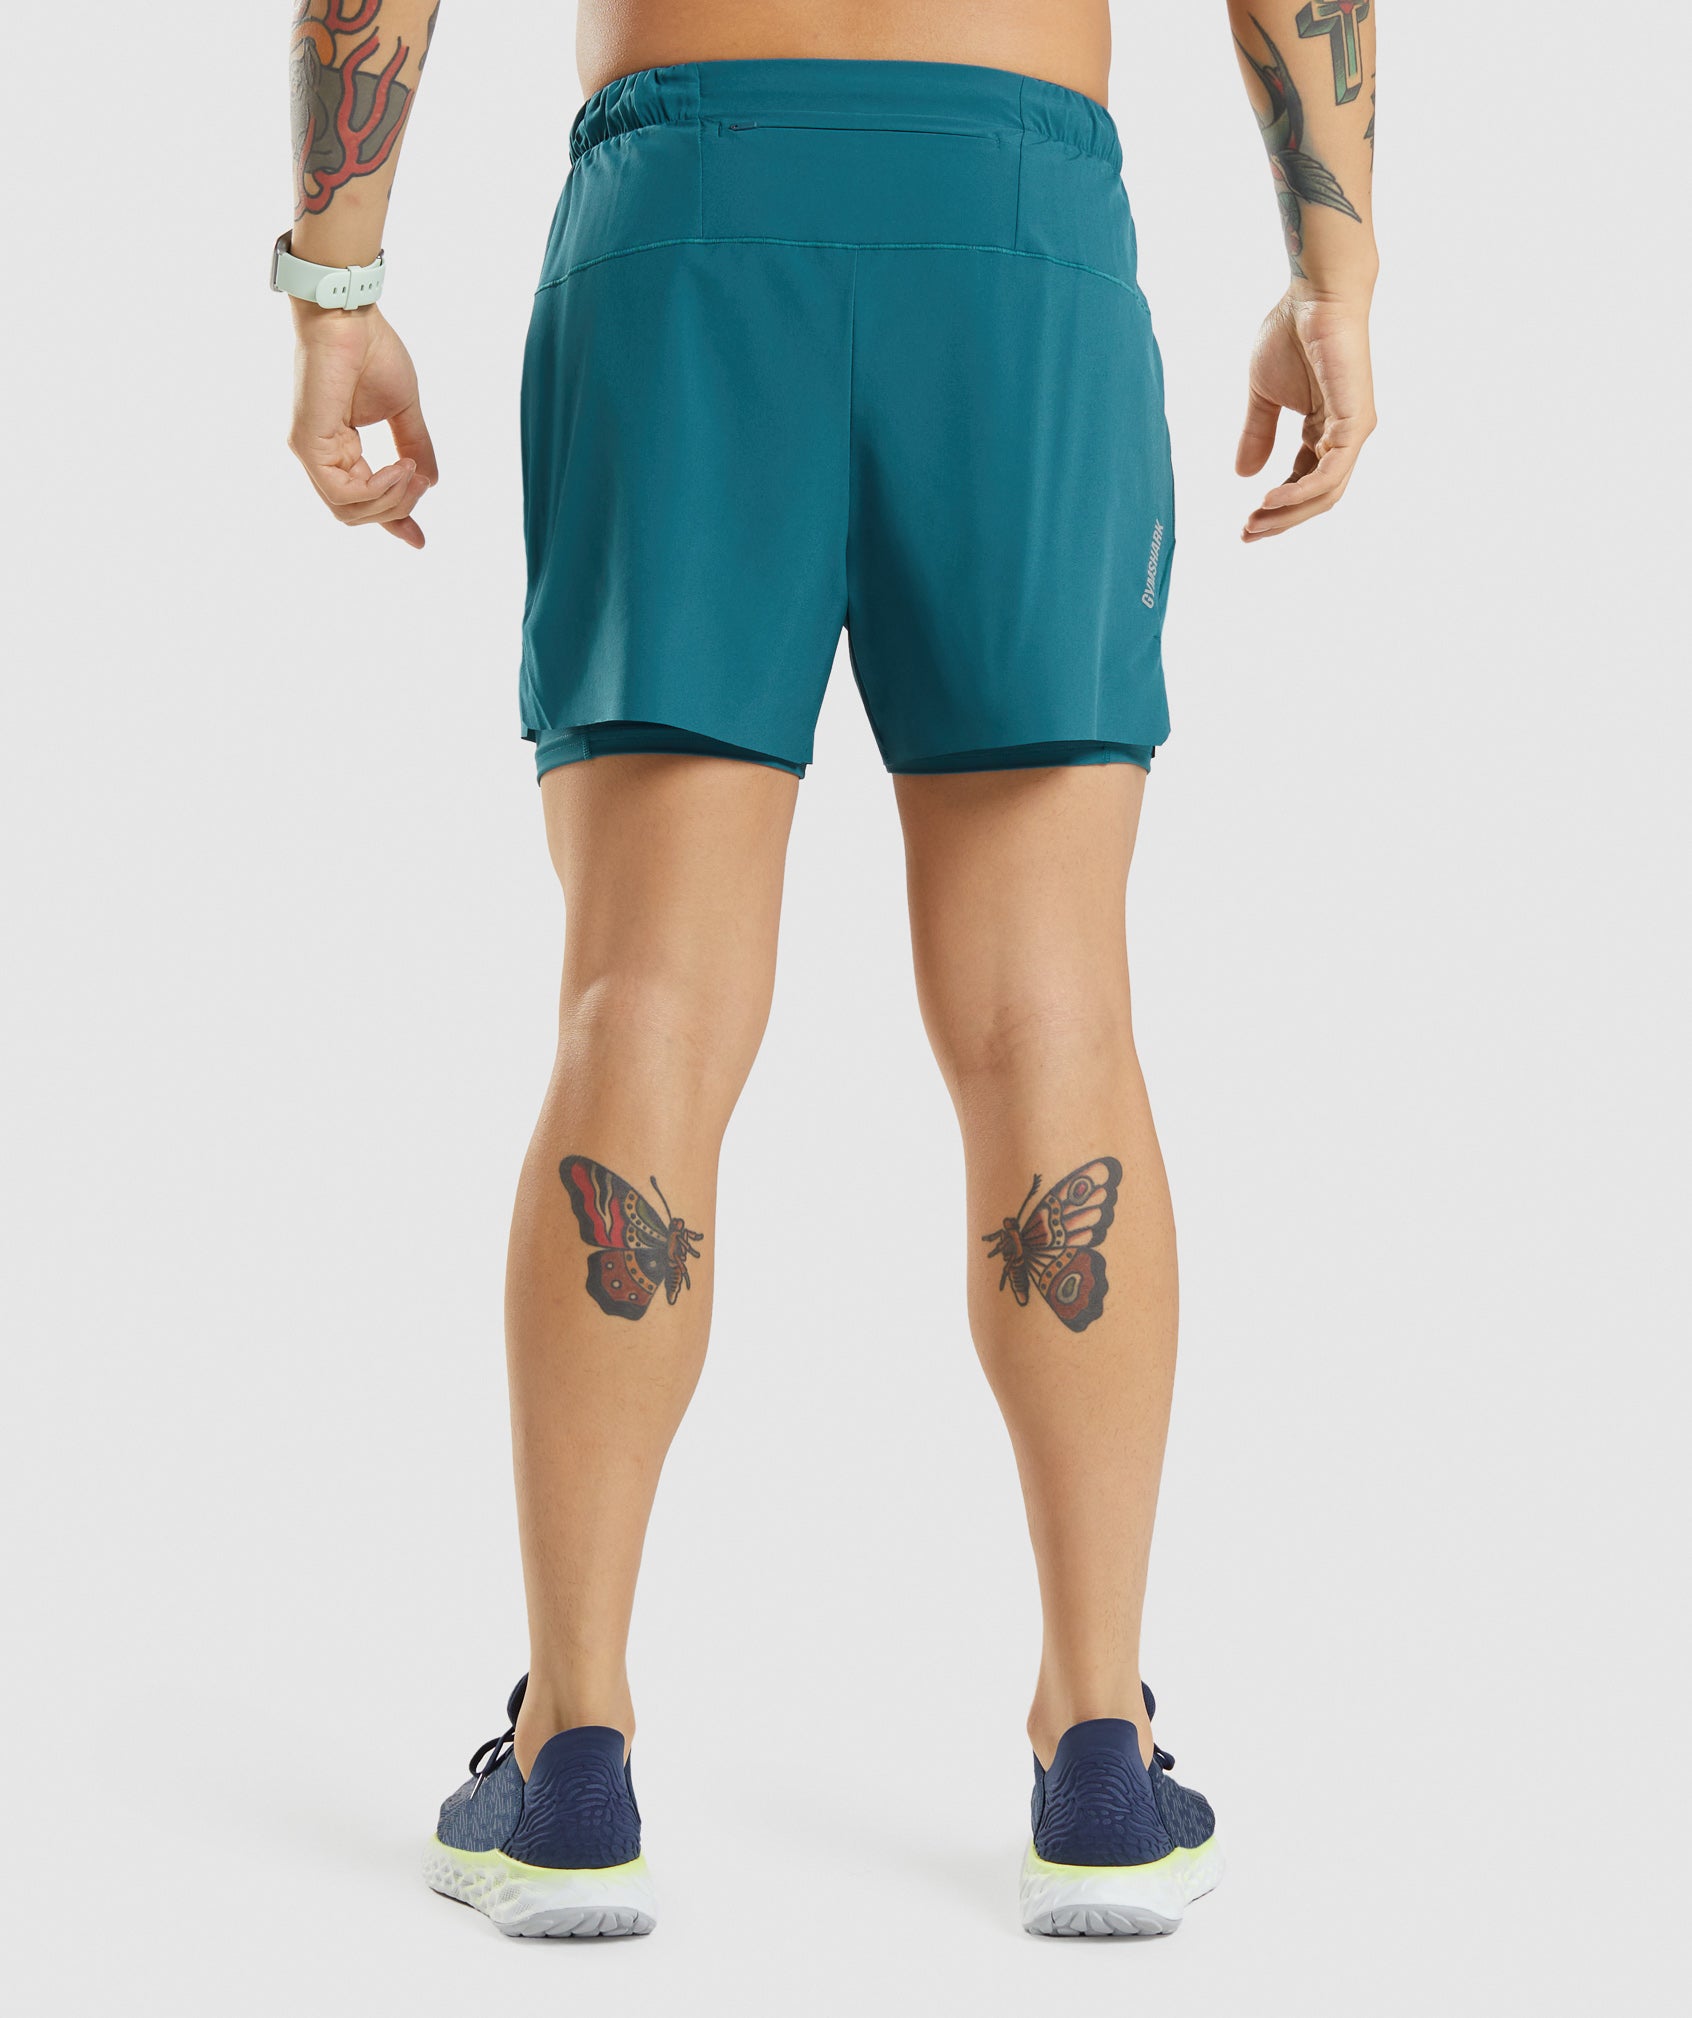 Speed 5" 2 in 1 Shorts in Teal